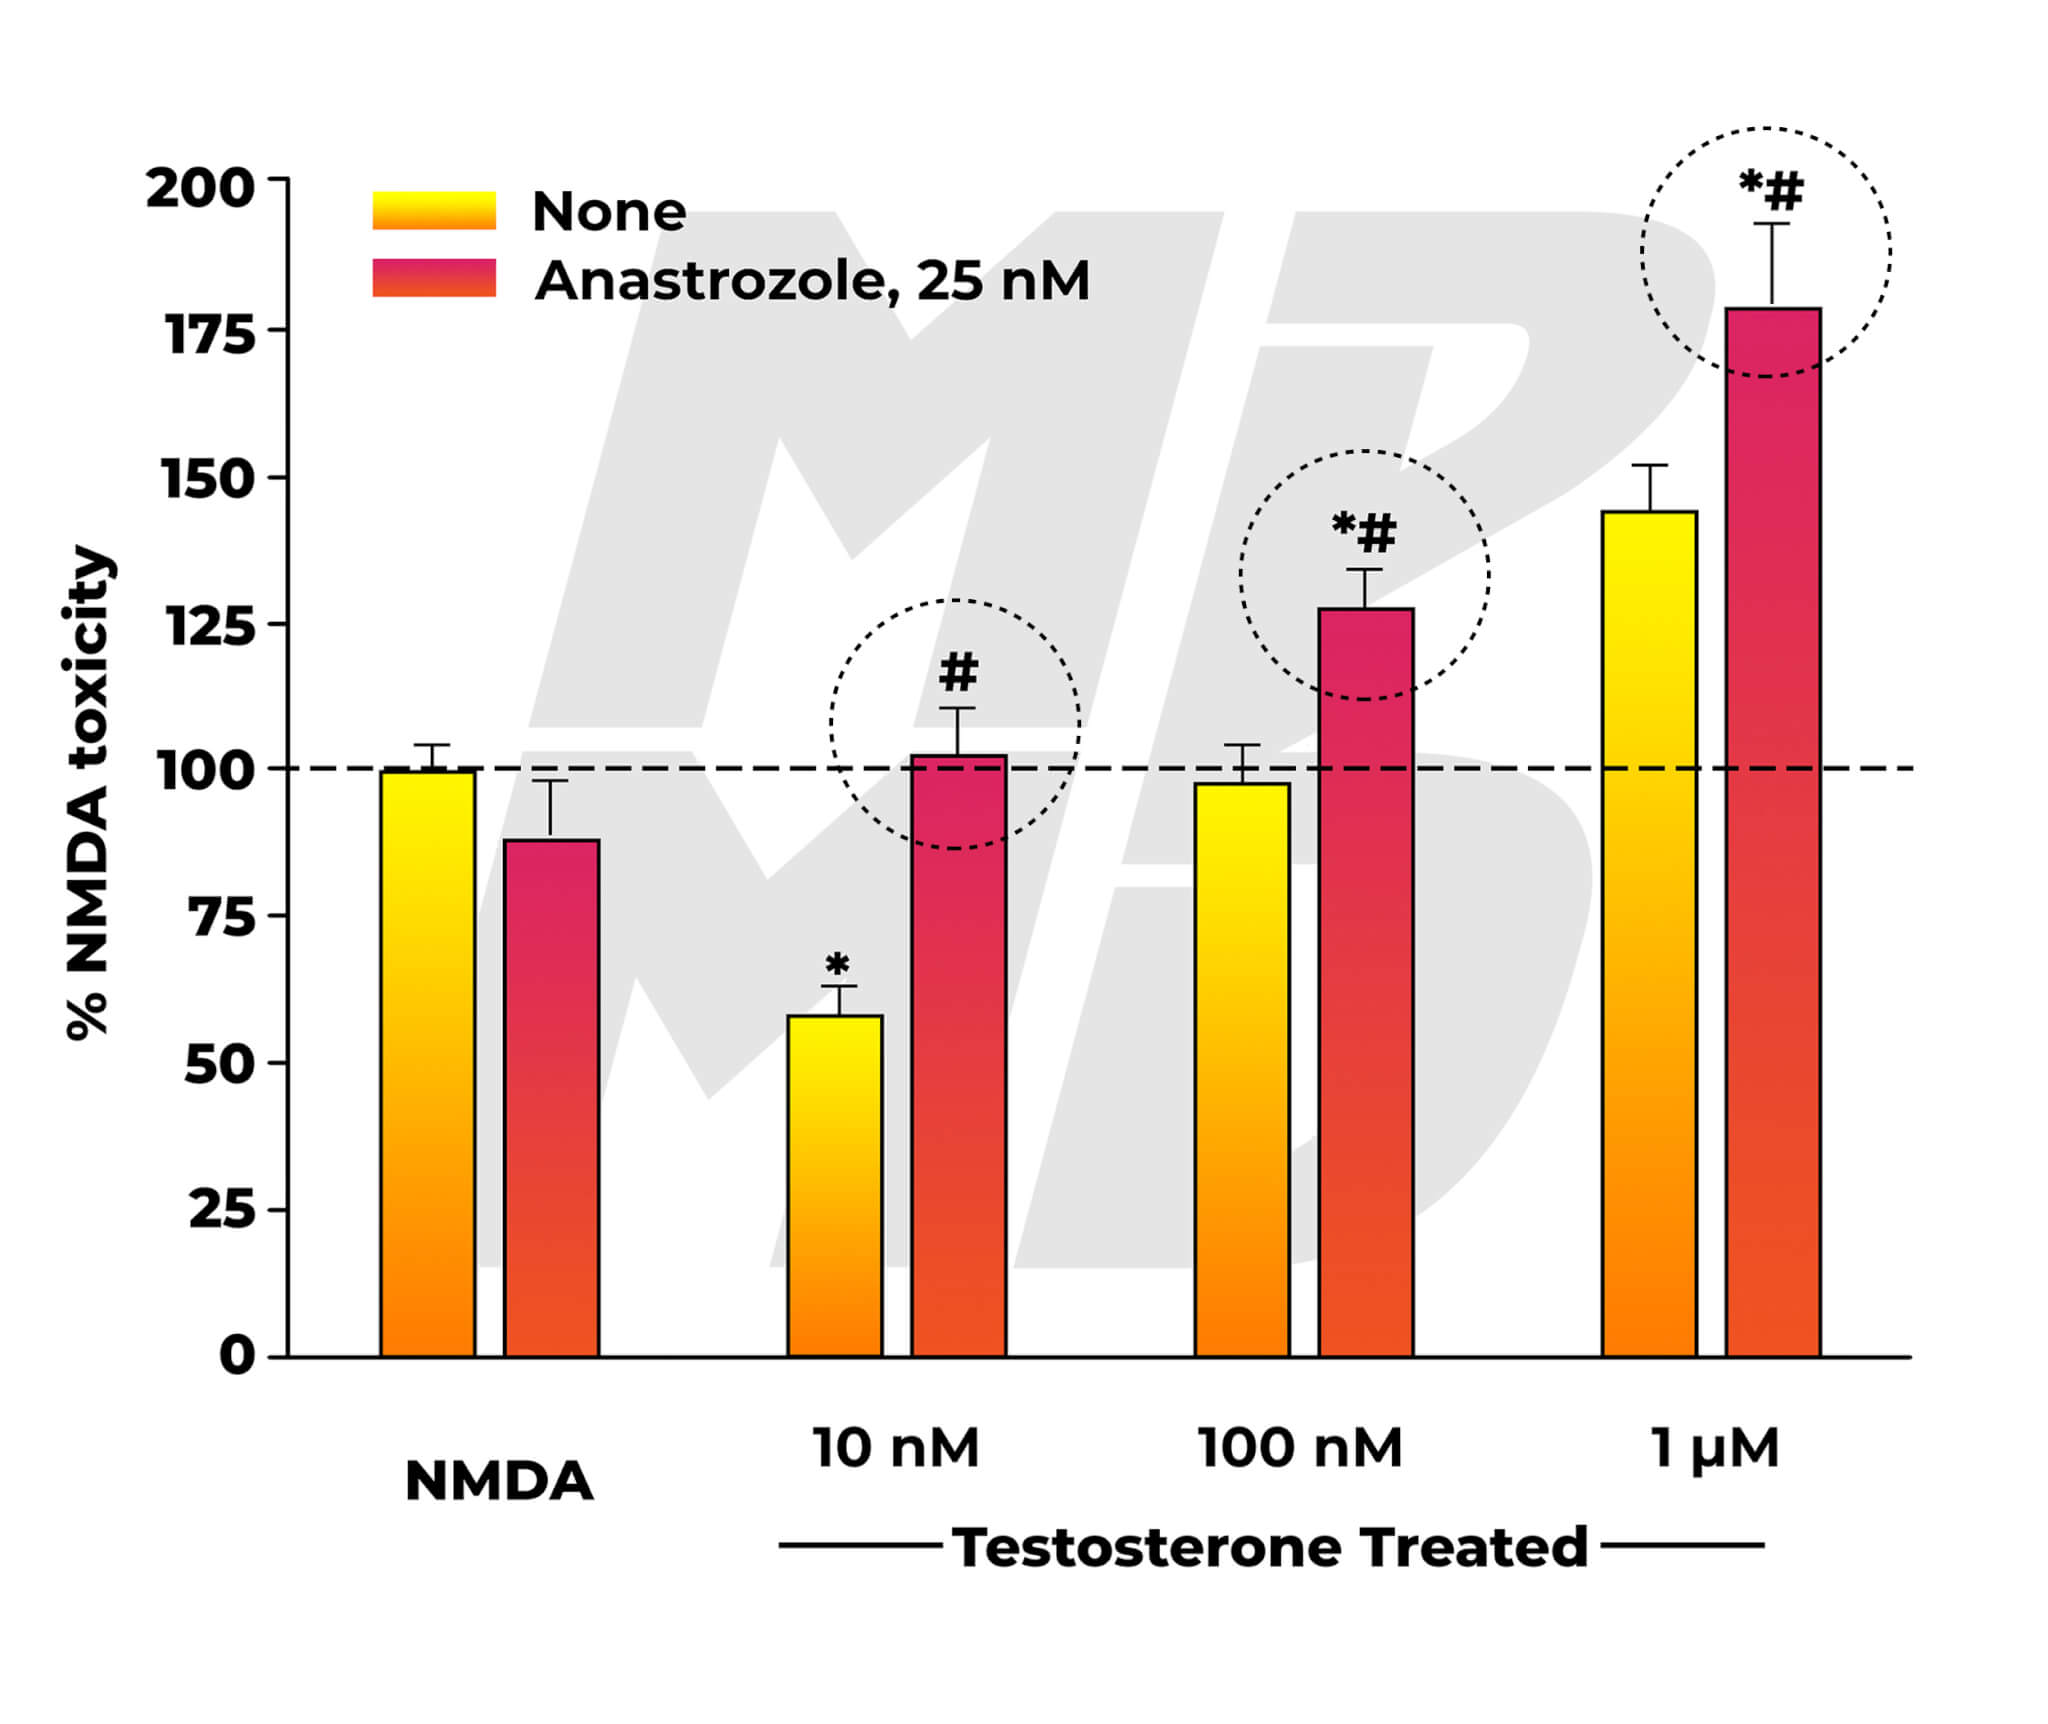 NMDA Neurotoxicity In Testosterone Treated Group Co-Administered Nothing, Or The Aromatase Inhibitor Arimidex (Anastrozole) - Neuroprotective Effects Eliminated With Arimidex